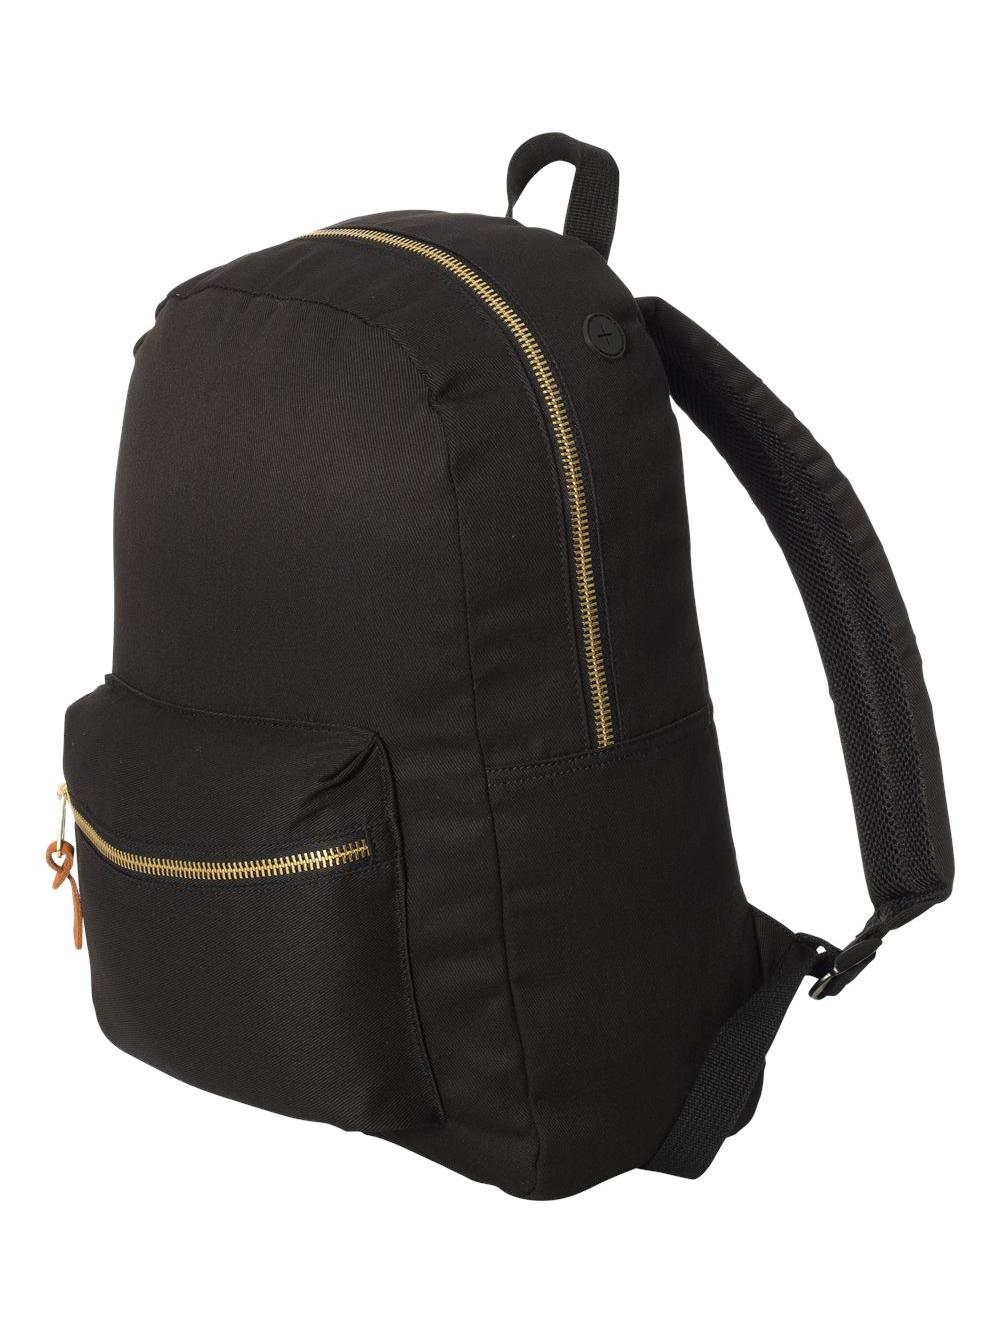 Heritage Canvas Backpack LB3101 - image 1 of 3